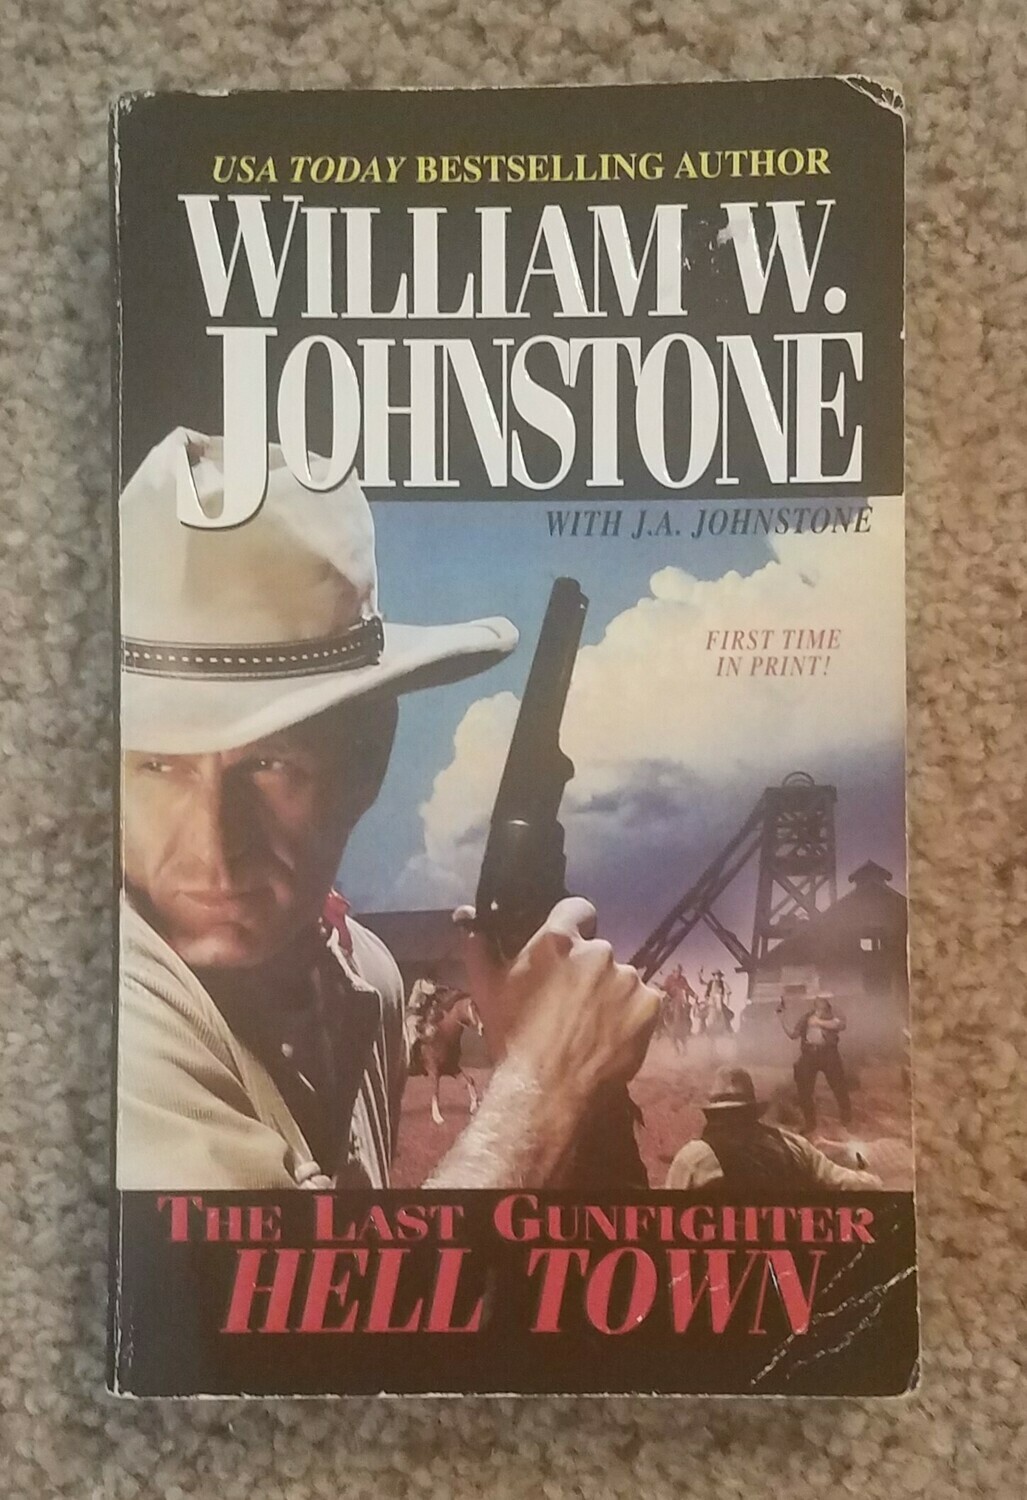 The Last Gunfighter: Hell Town by William W. Johnstone